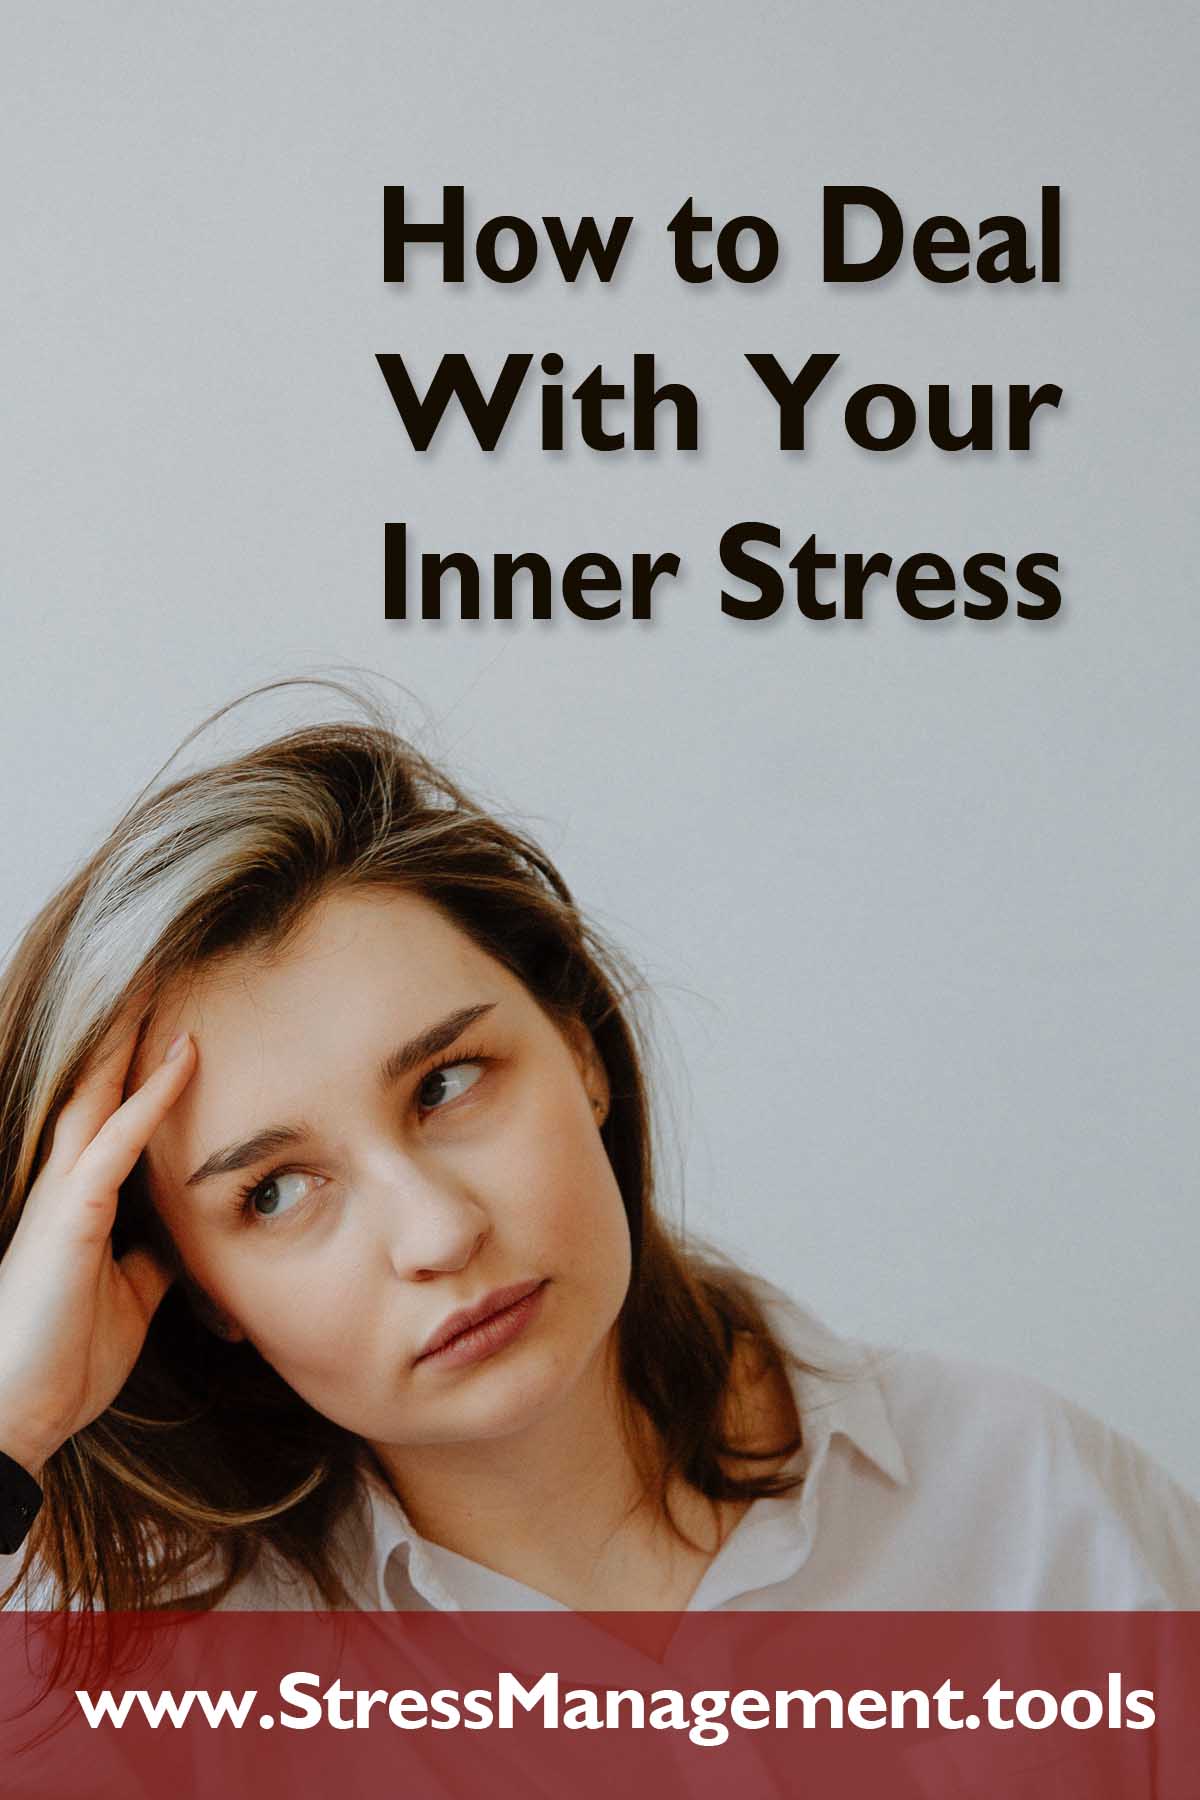 How to Deal With Your Inner Stress